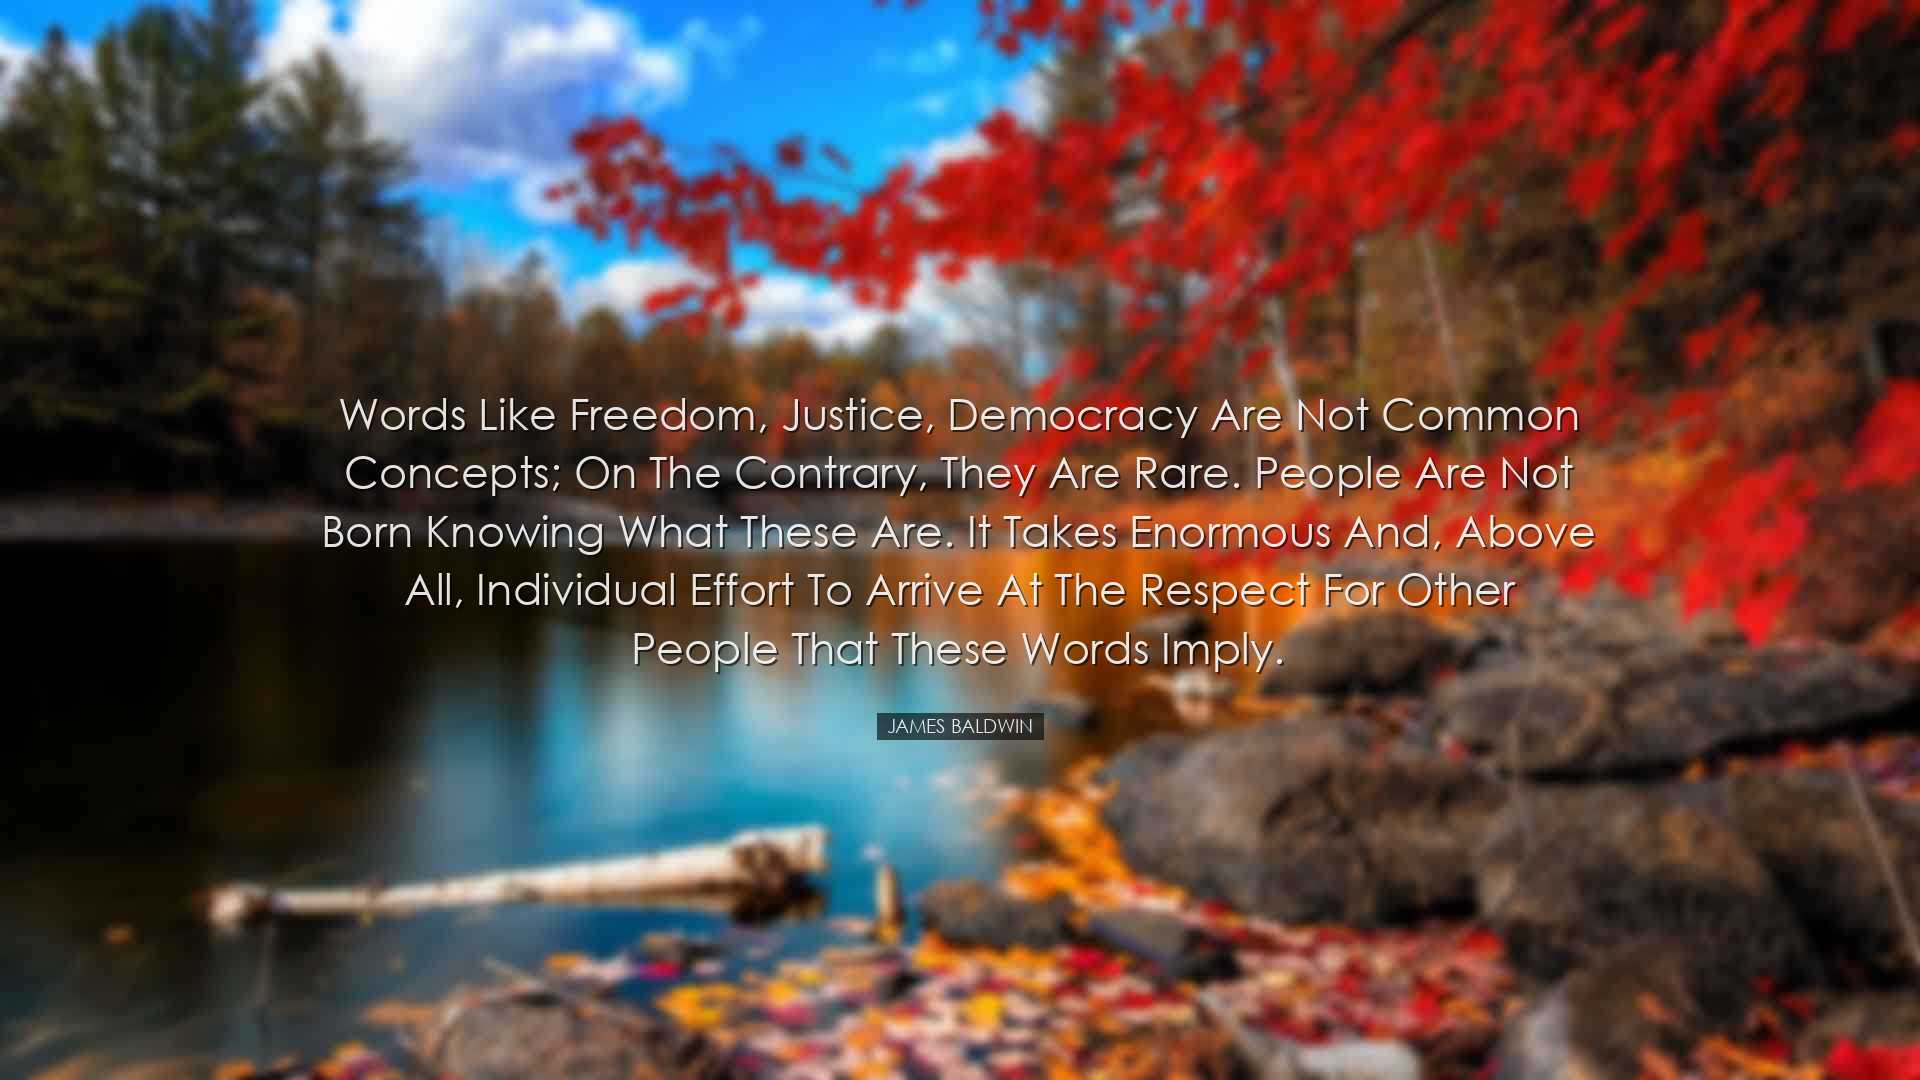 Words like freedom, justice, democracy are not common concepts; on